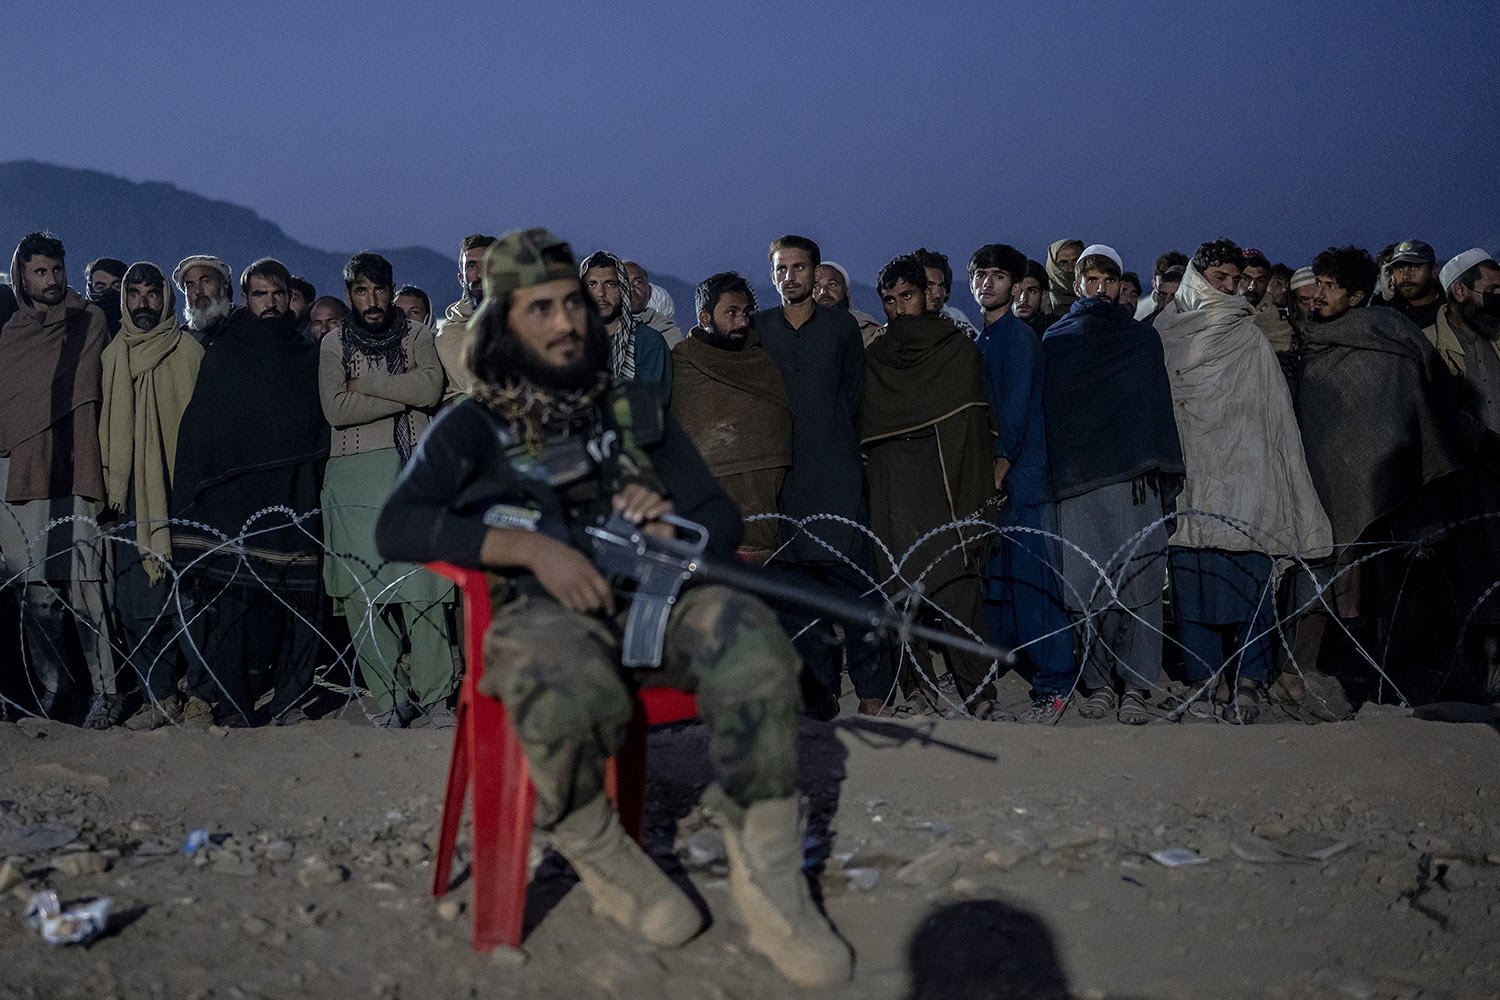  A Taliban fighter stands guard as Afghan refugees line up to register in a camp near the Pakistan-Afghanistan border in Torkham, Afghanistan, Nov. 4, 2023. (AP Photo/Ebrahim Noroozi) 